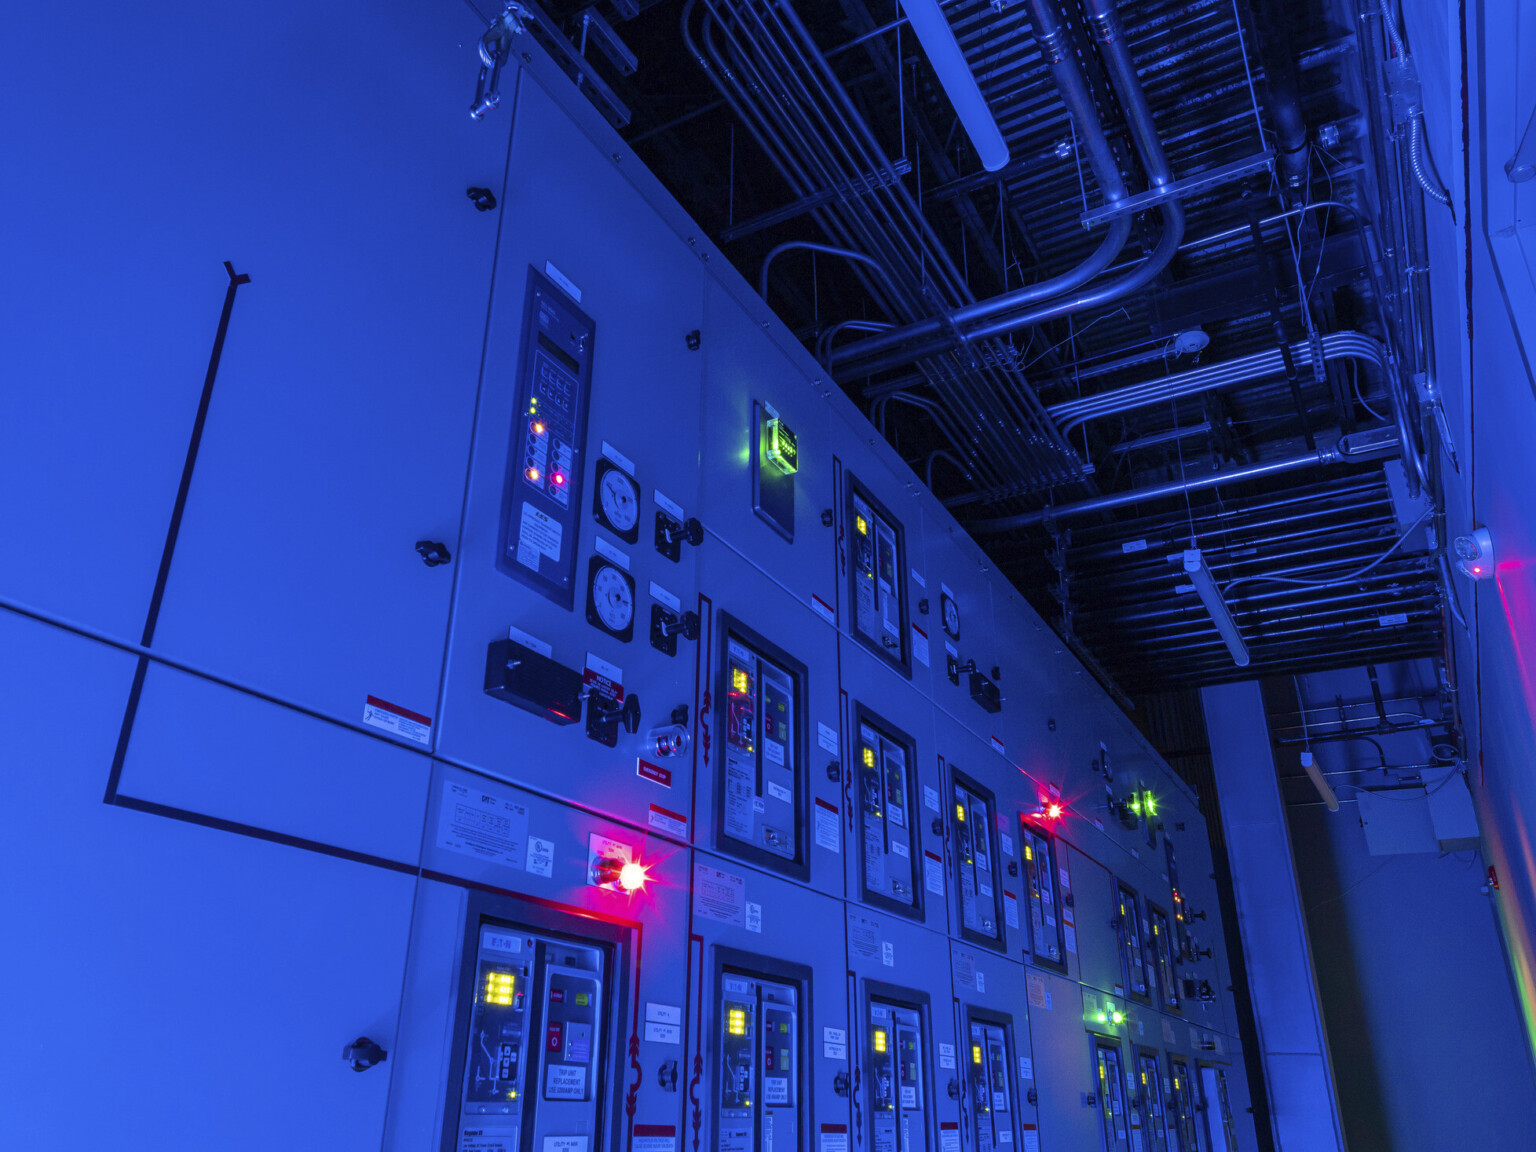 Red and green lights illuminating in a blue control panel displaying numerous switches and lights